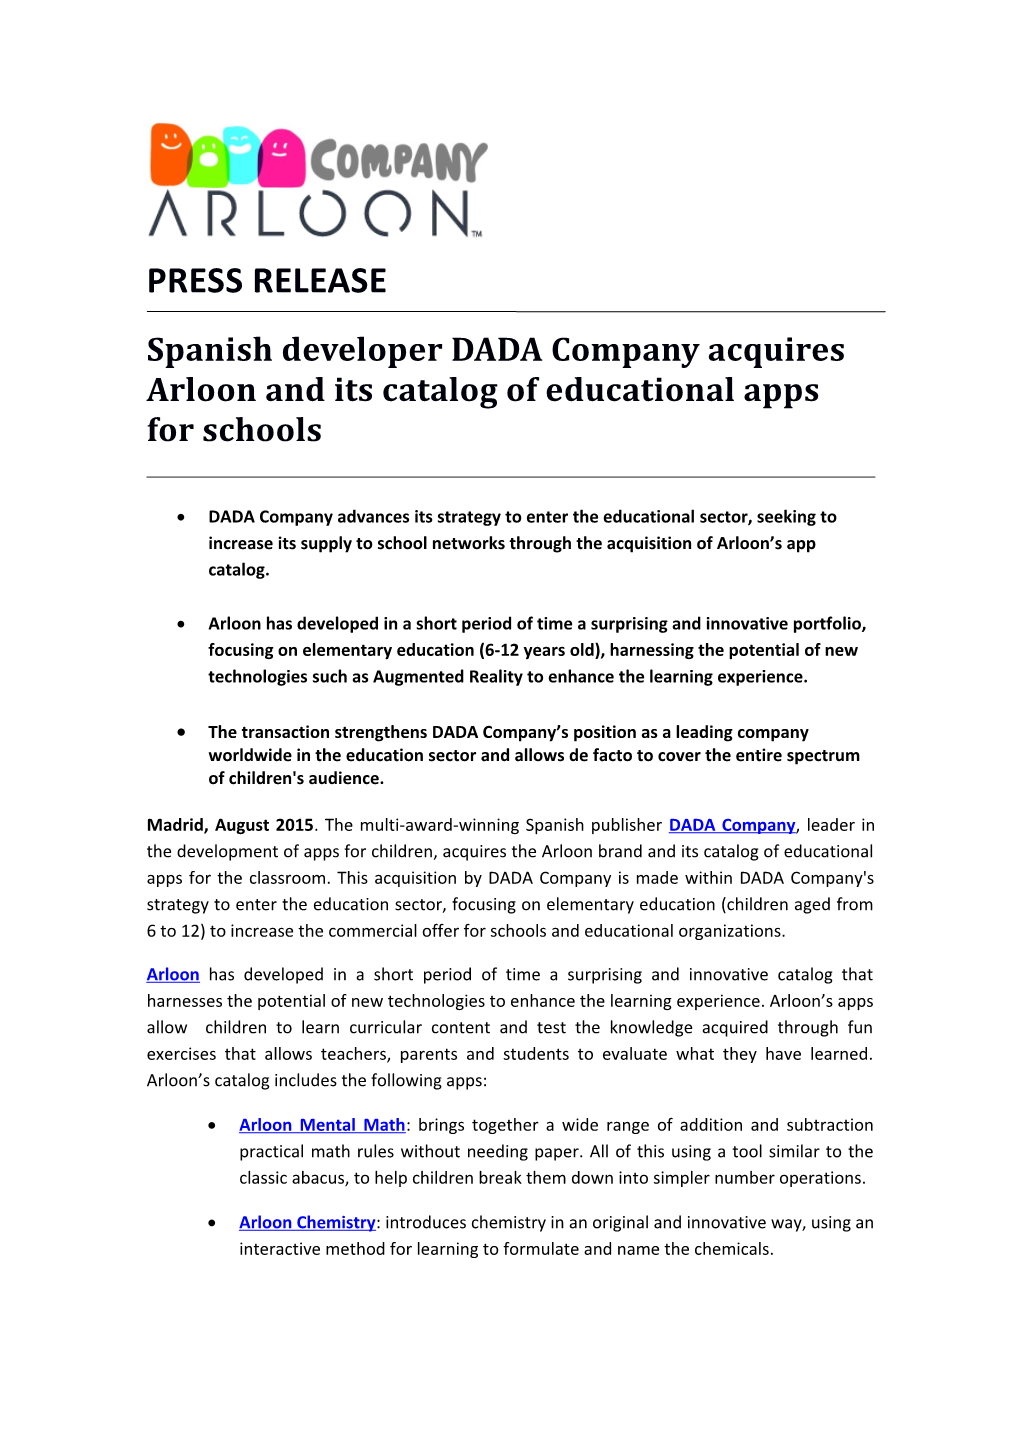 Spanish Developer DADA Company Acquires Arloon and Its Catalog of Educational Apps for Schools